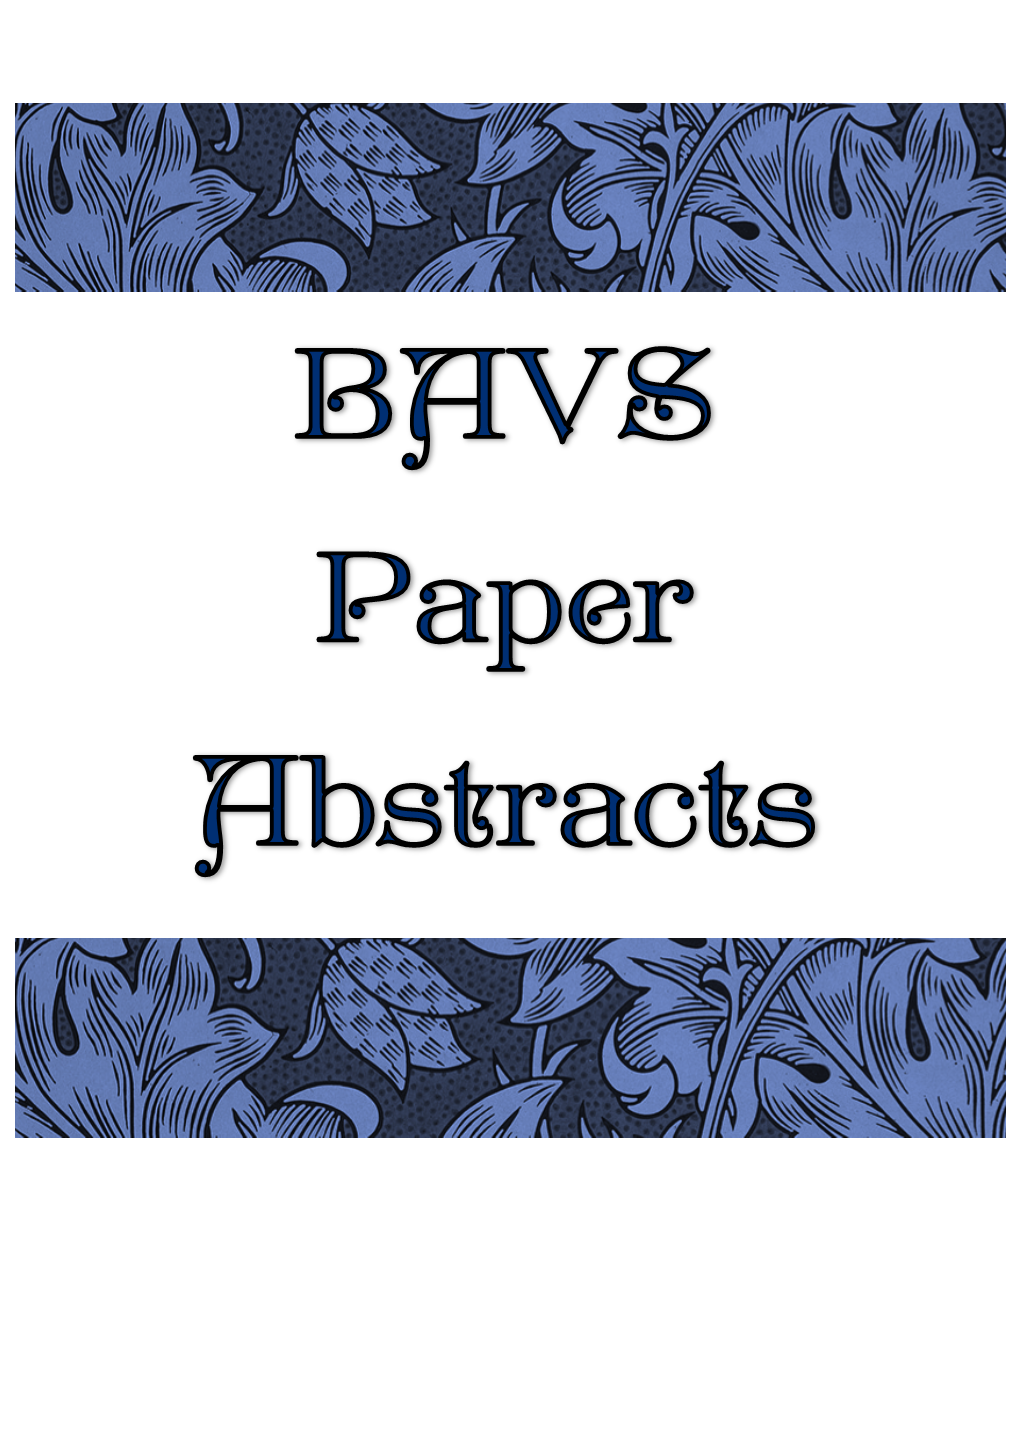 You Can Read and Download Abstract Booklet Here